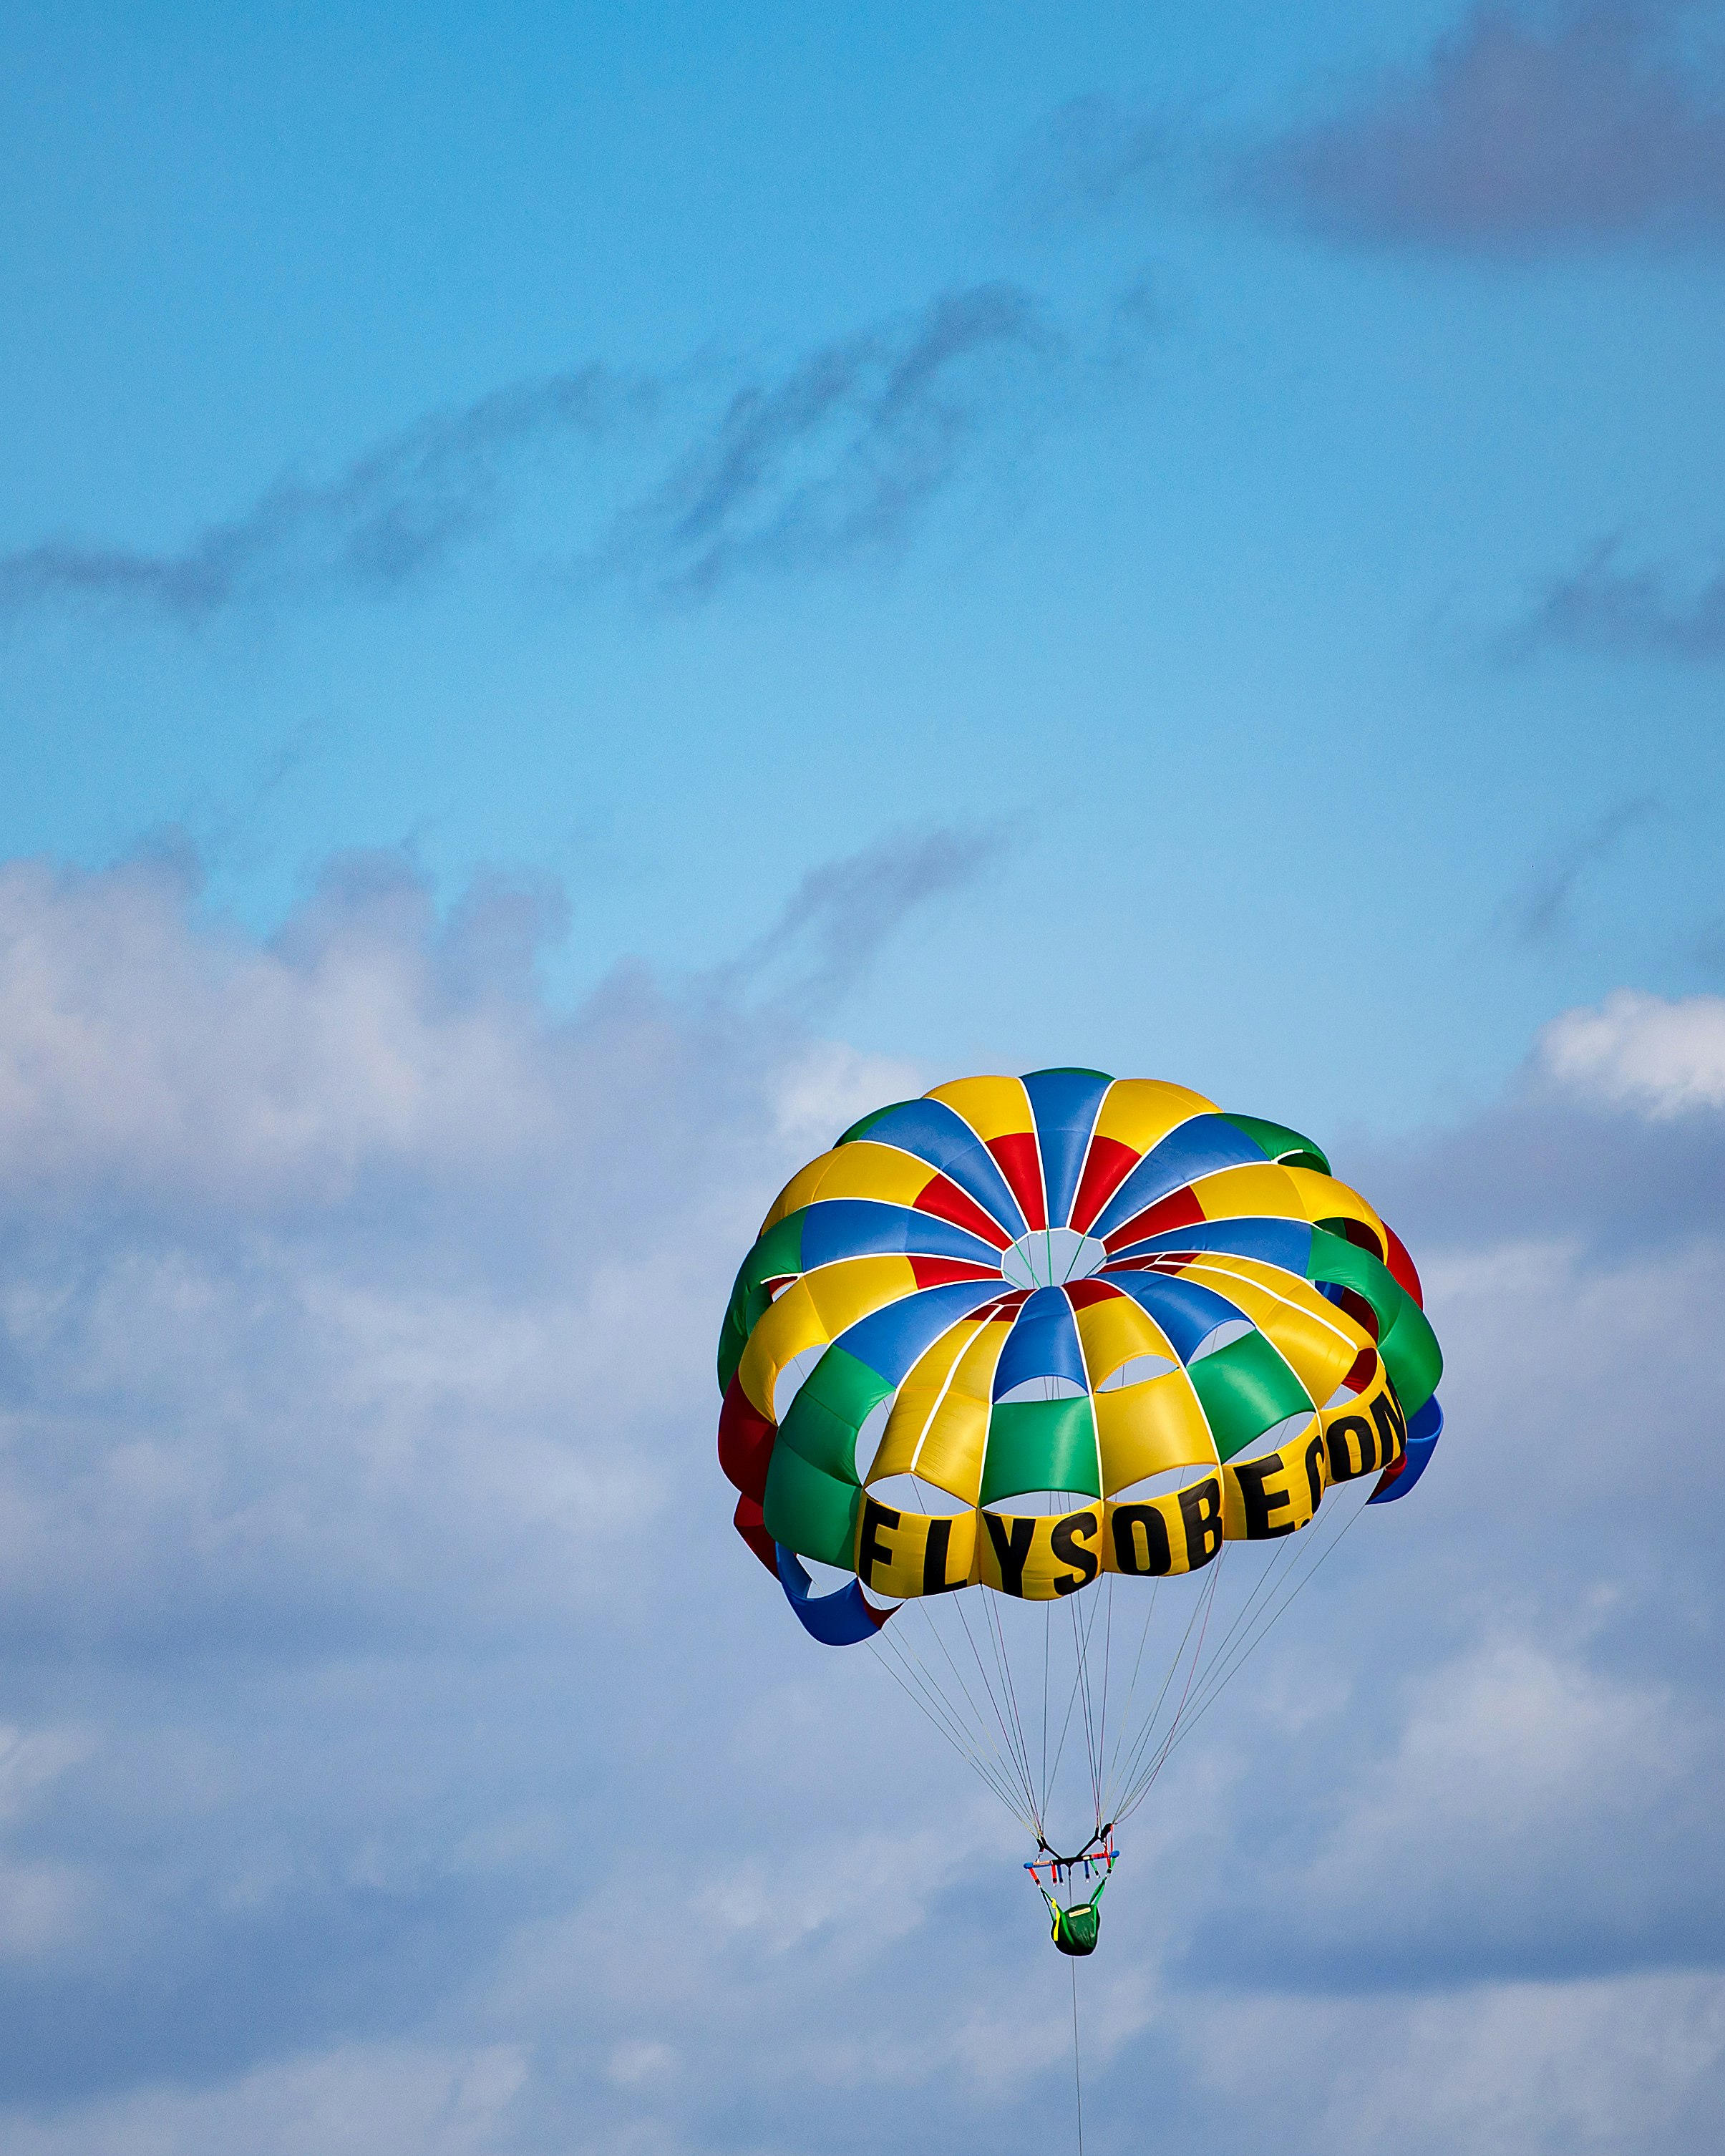 yellow blue and red hot air balloon in mid air under cloudy sky during daytime